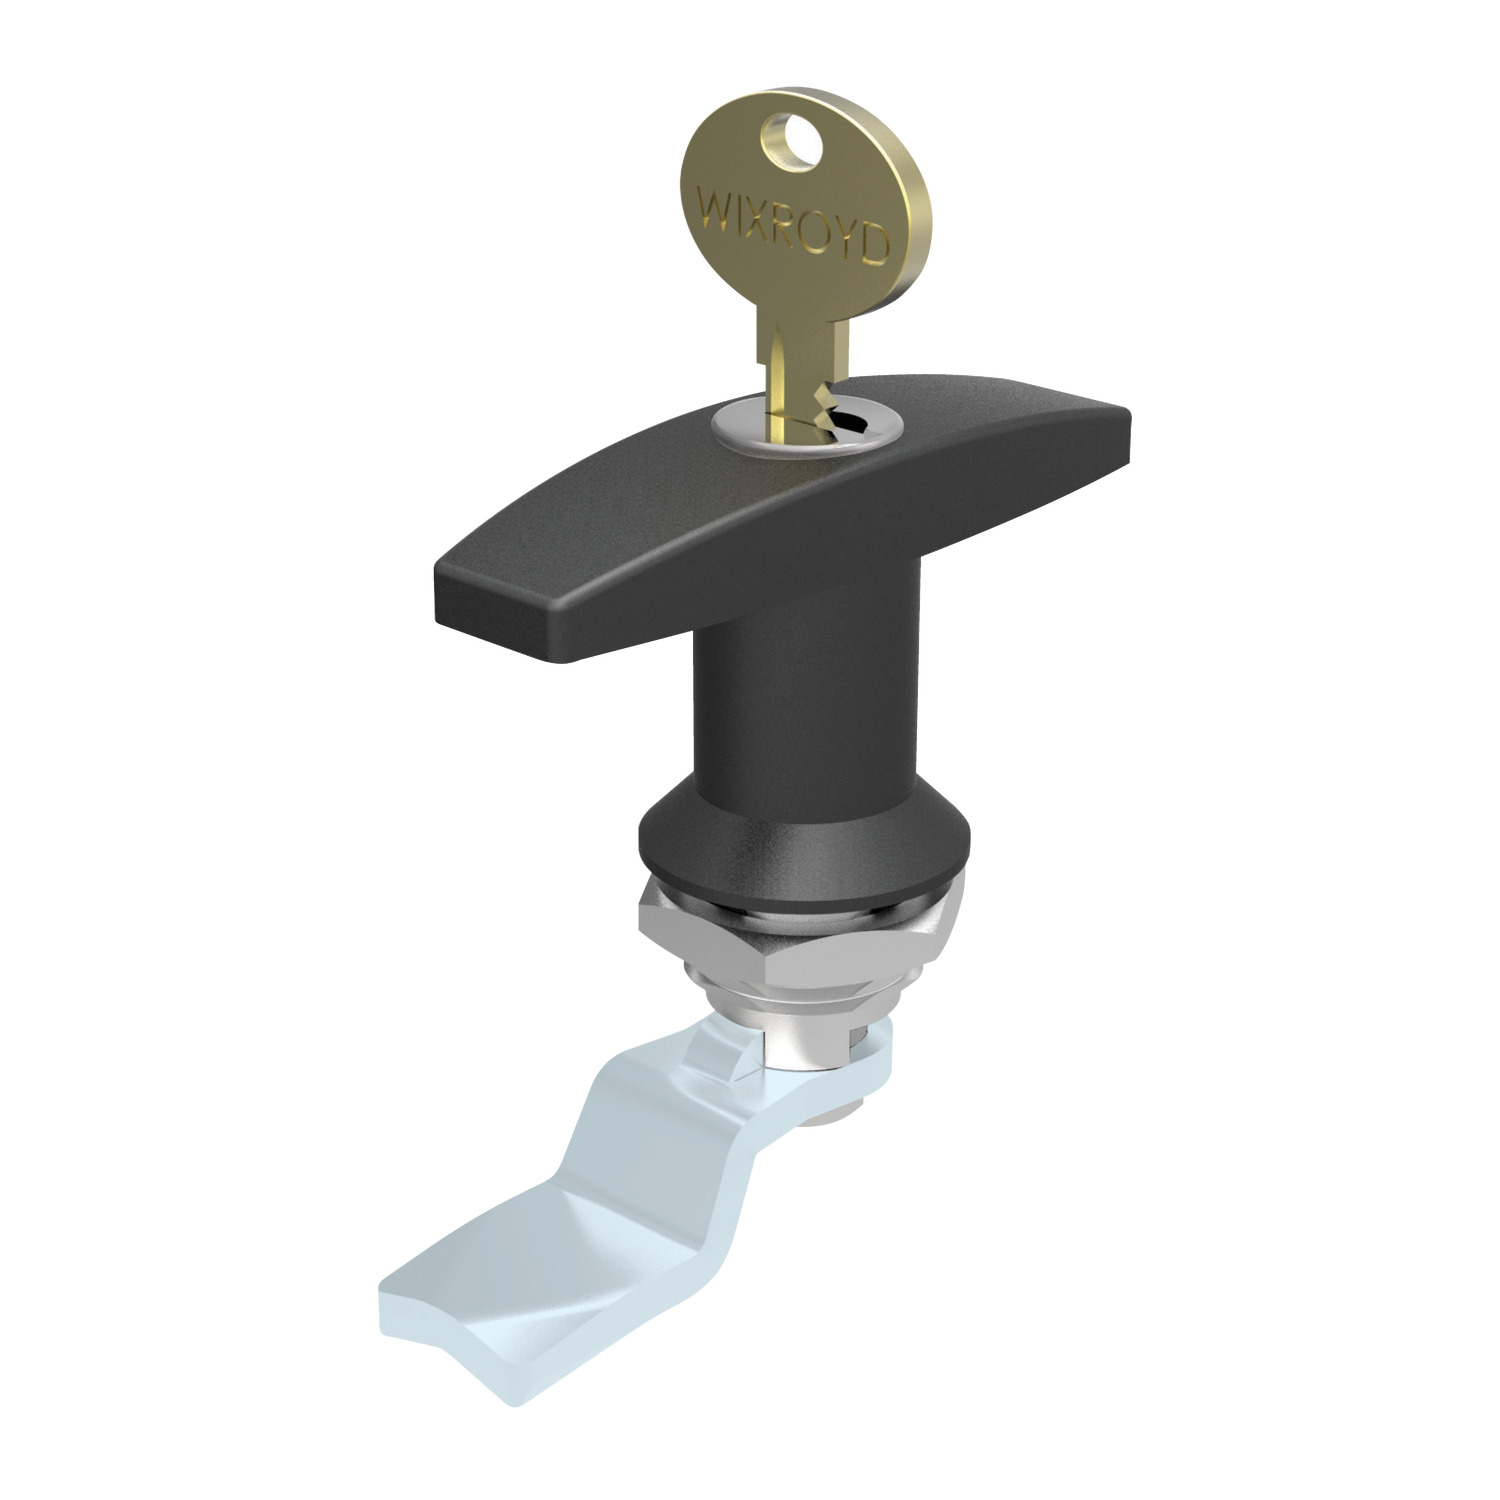 Cam Locks - Flexi-System Different handle types to suit your needs. Non cylinder lock versions available for easy opening and securing.